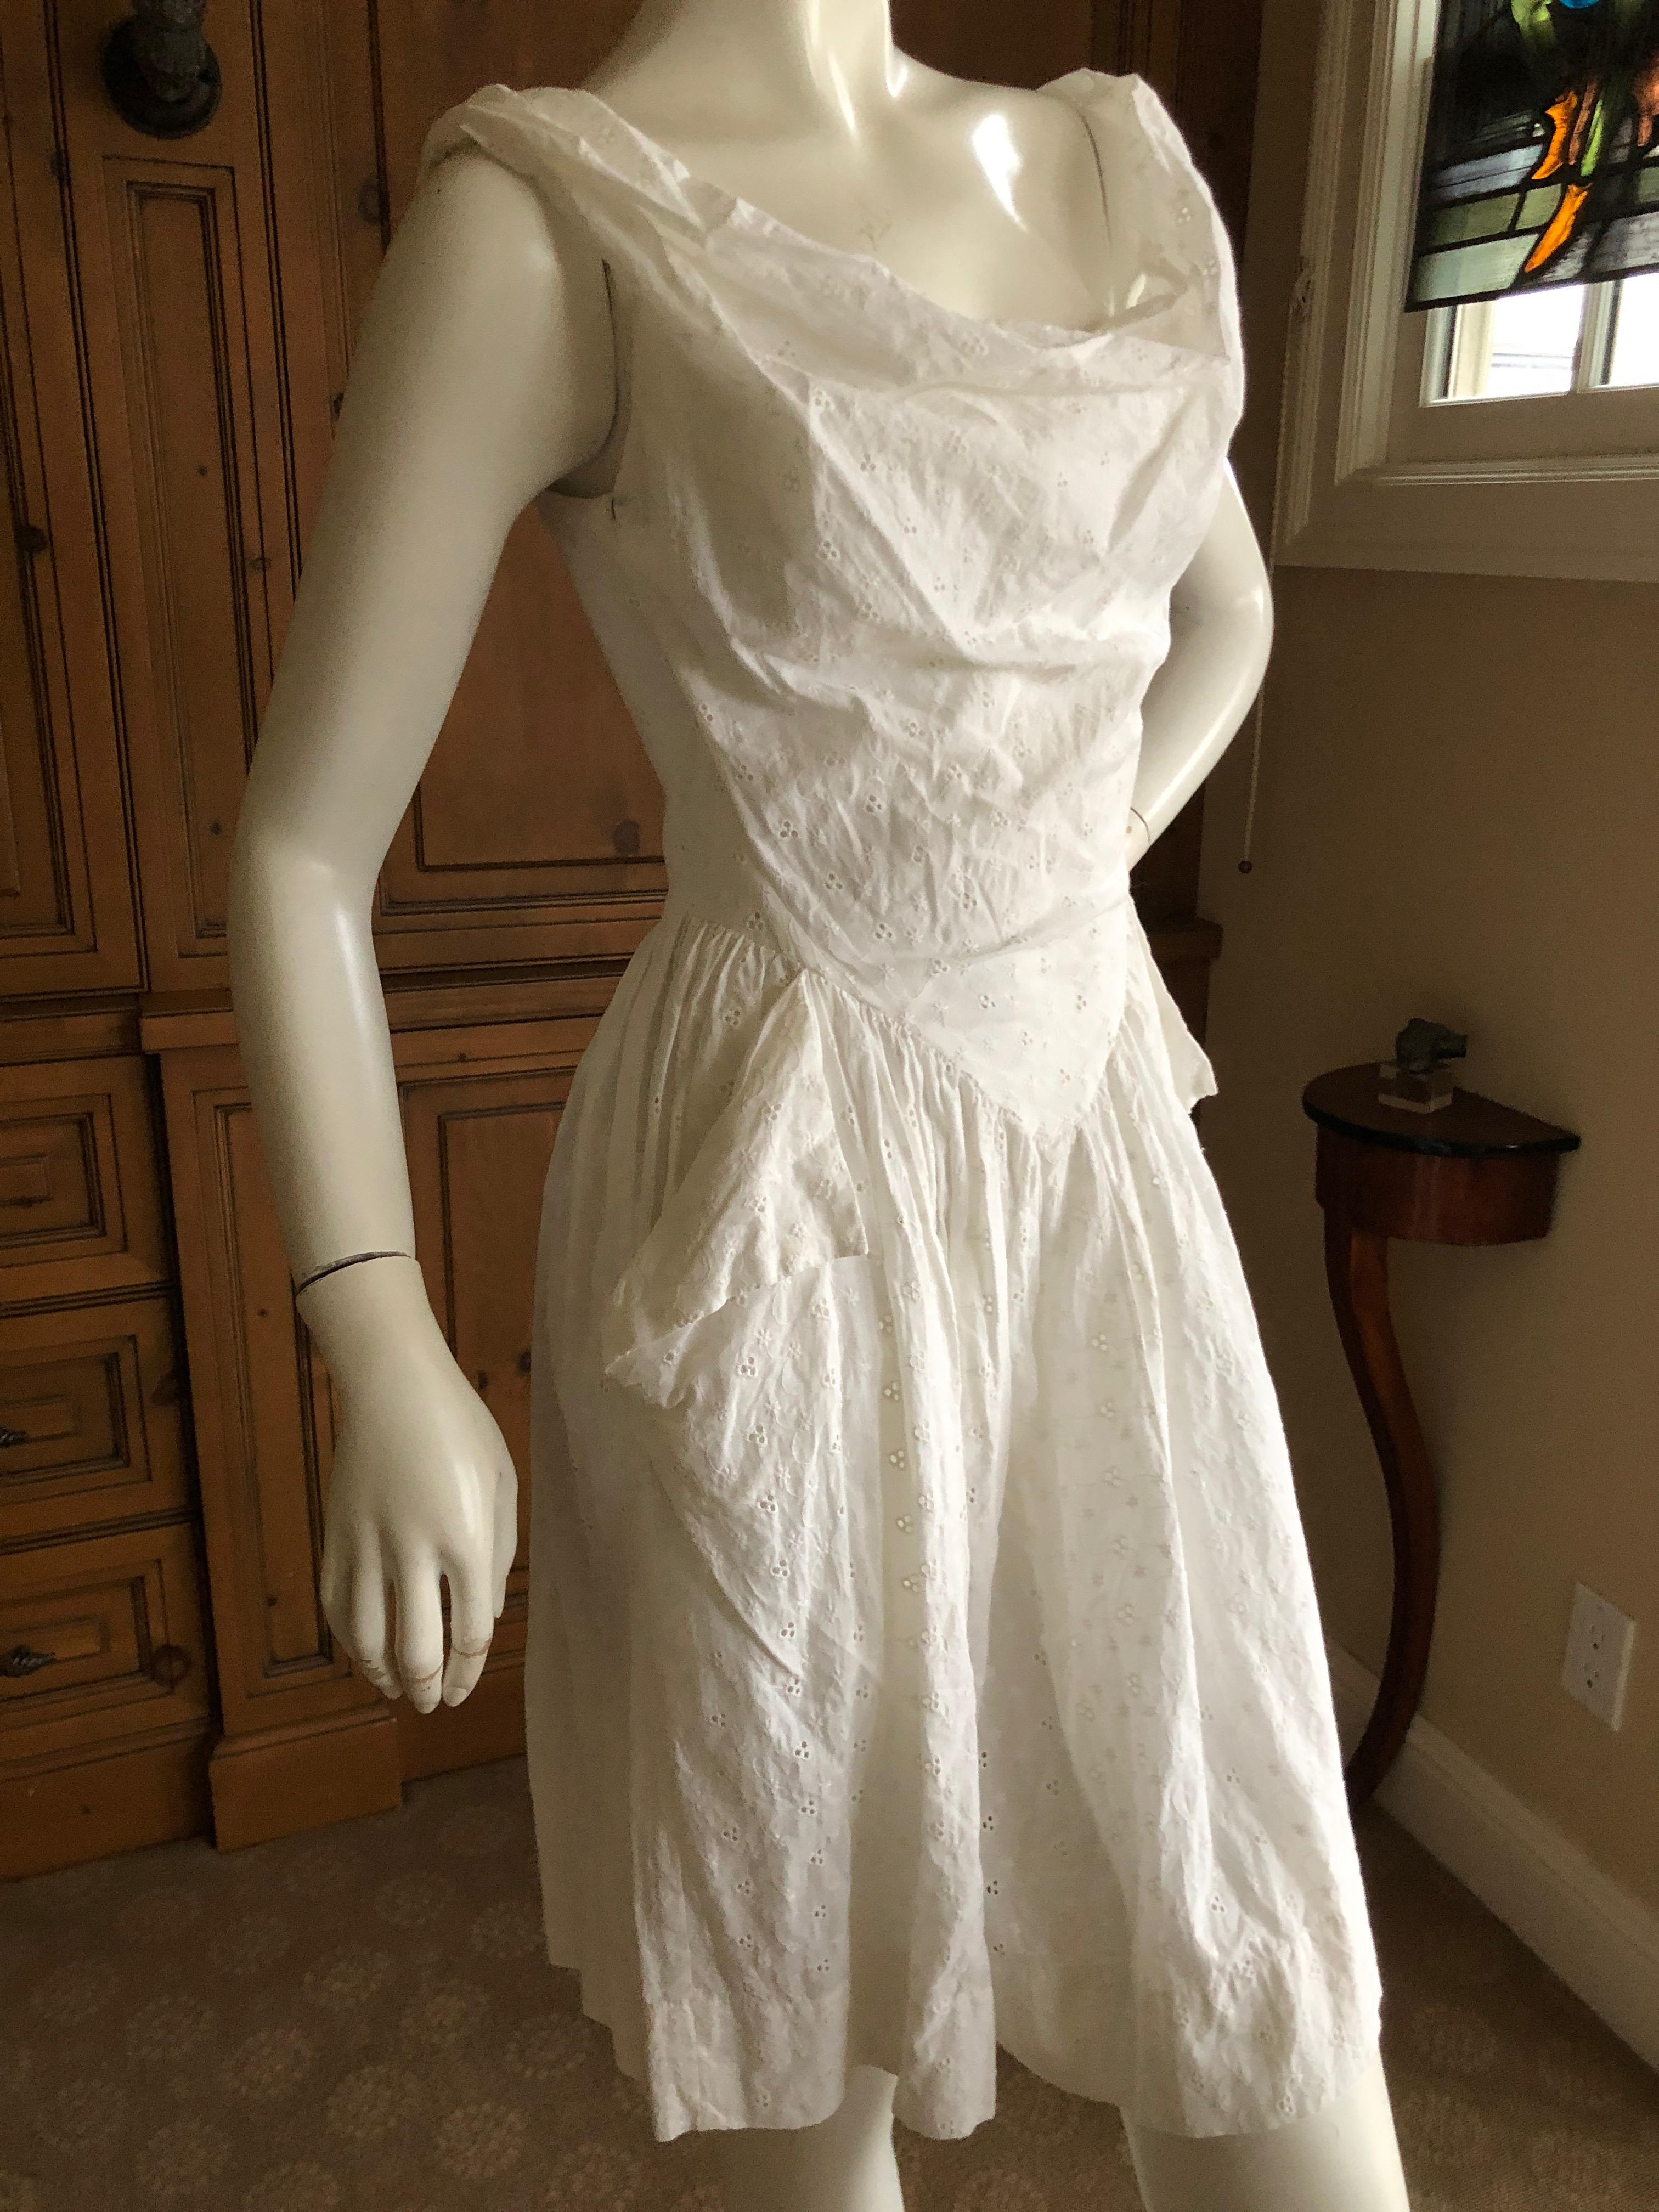 Vivienne Westwood Anglomania White Cotton Eyelet Dress In Excellent Condition For Sale In Cloverdale, CA